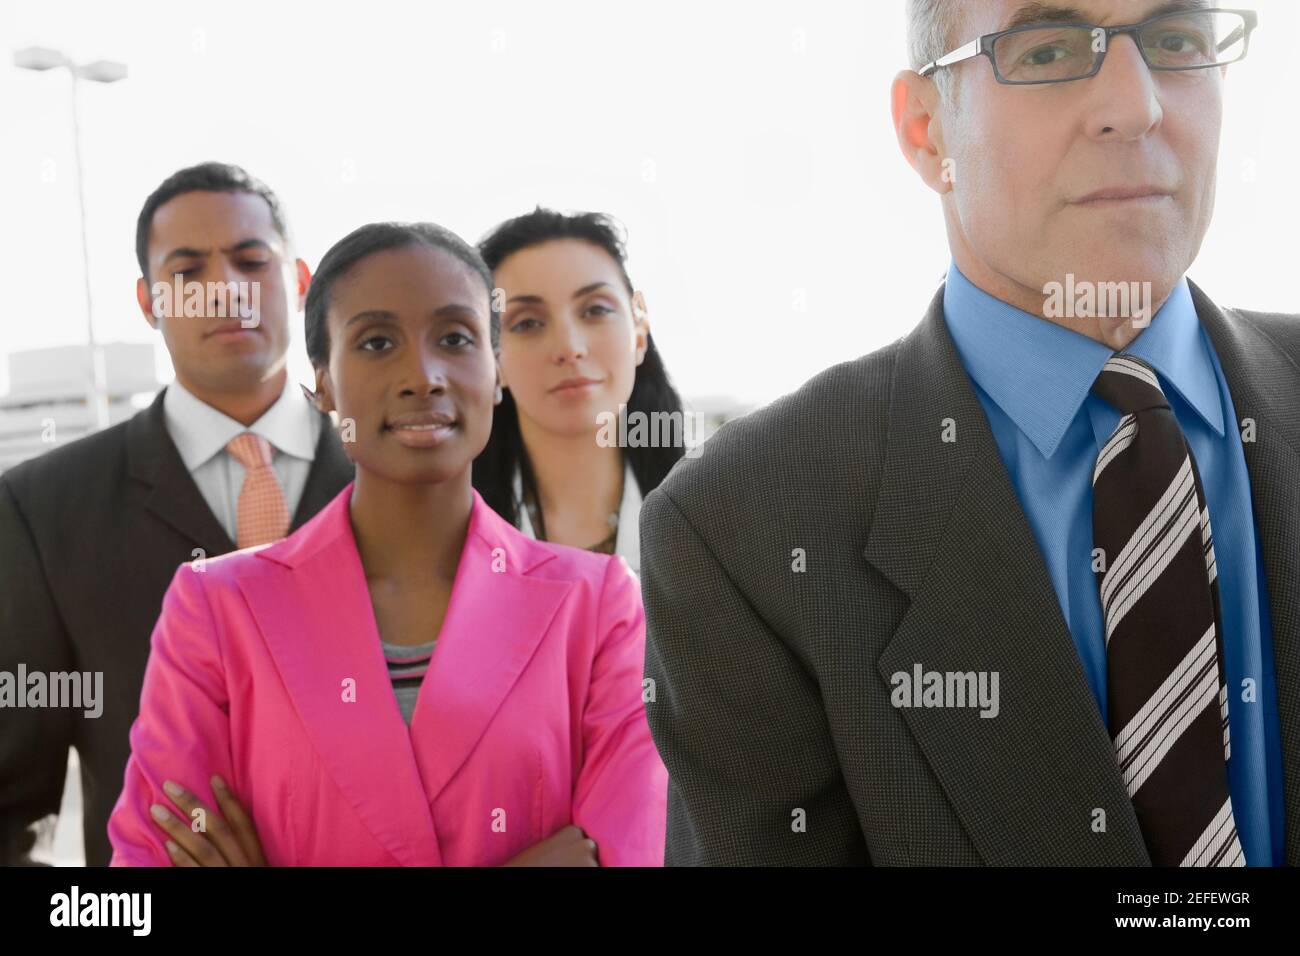 Two businessmen standing at an airport with two businesswomen Stock Photo